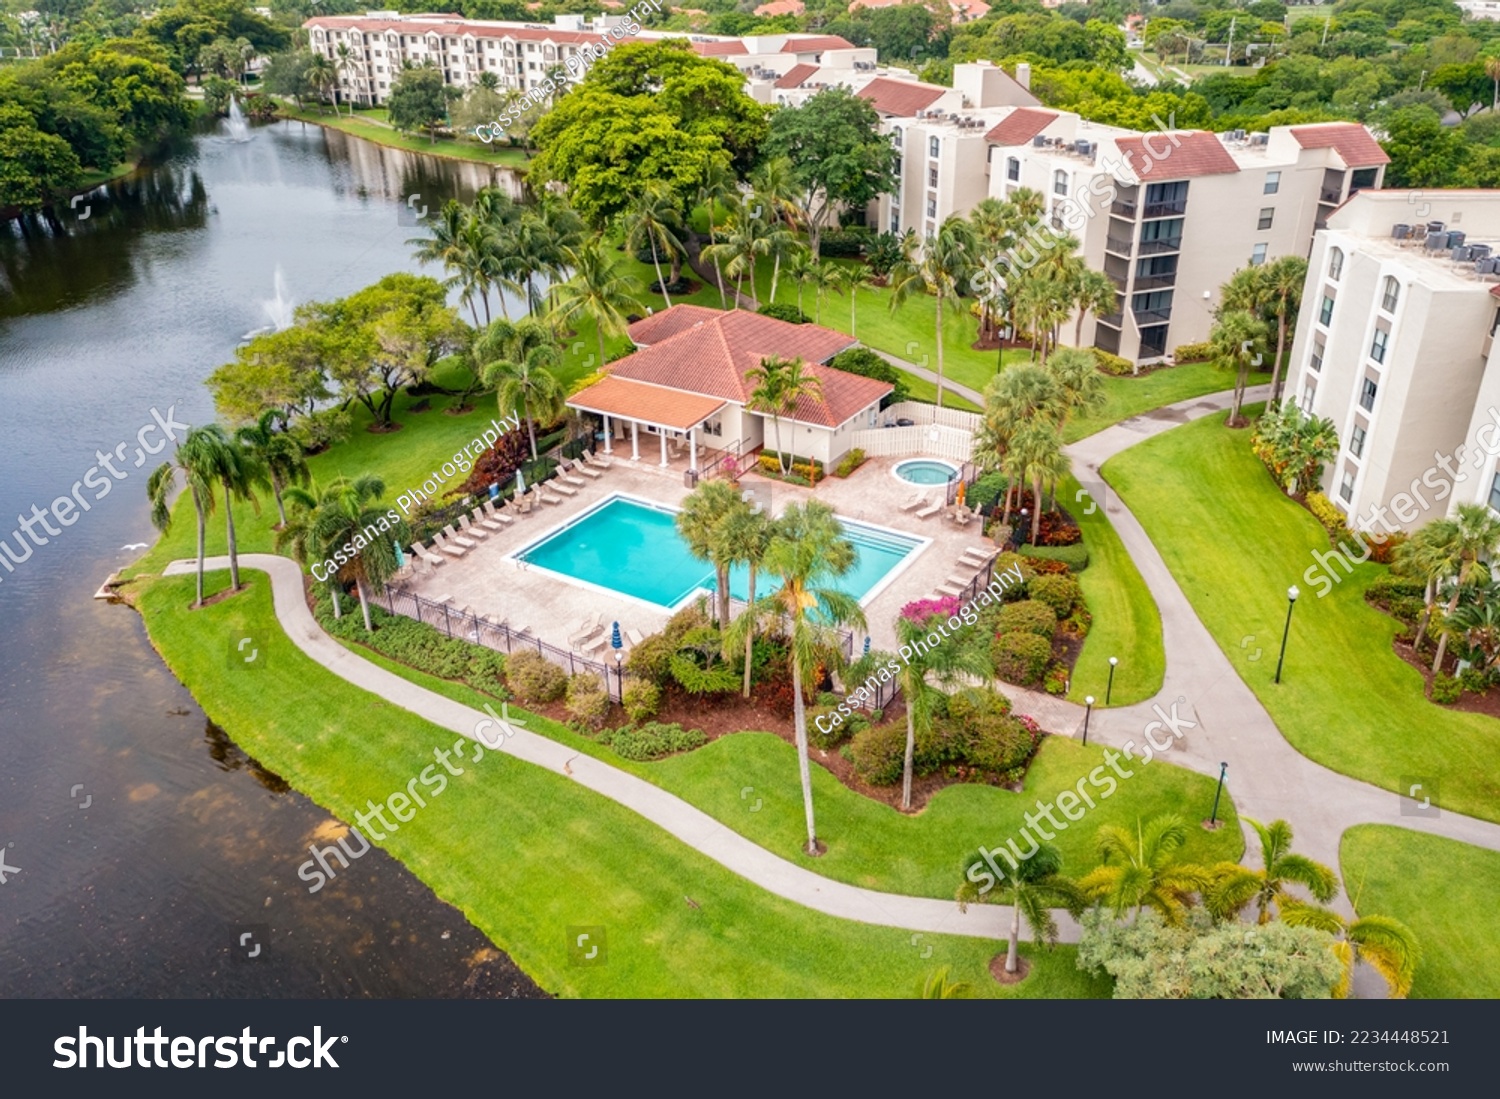 Aerial drone view to the suburbs in Delray Beach in Miami Florida, there is large tropical vegetation, houses with tiles #2234448521